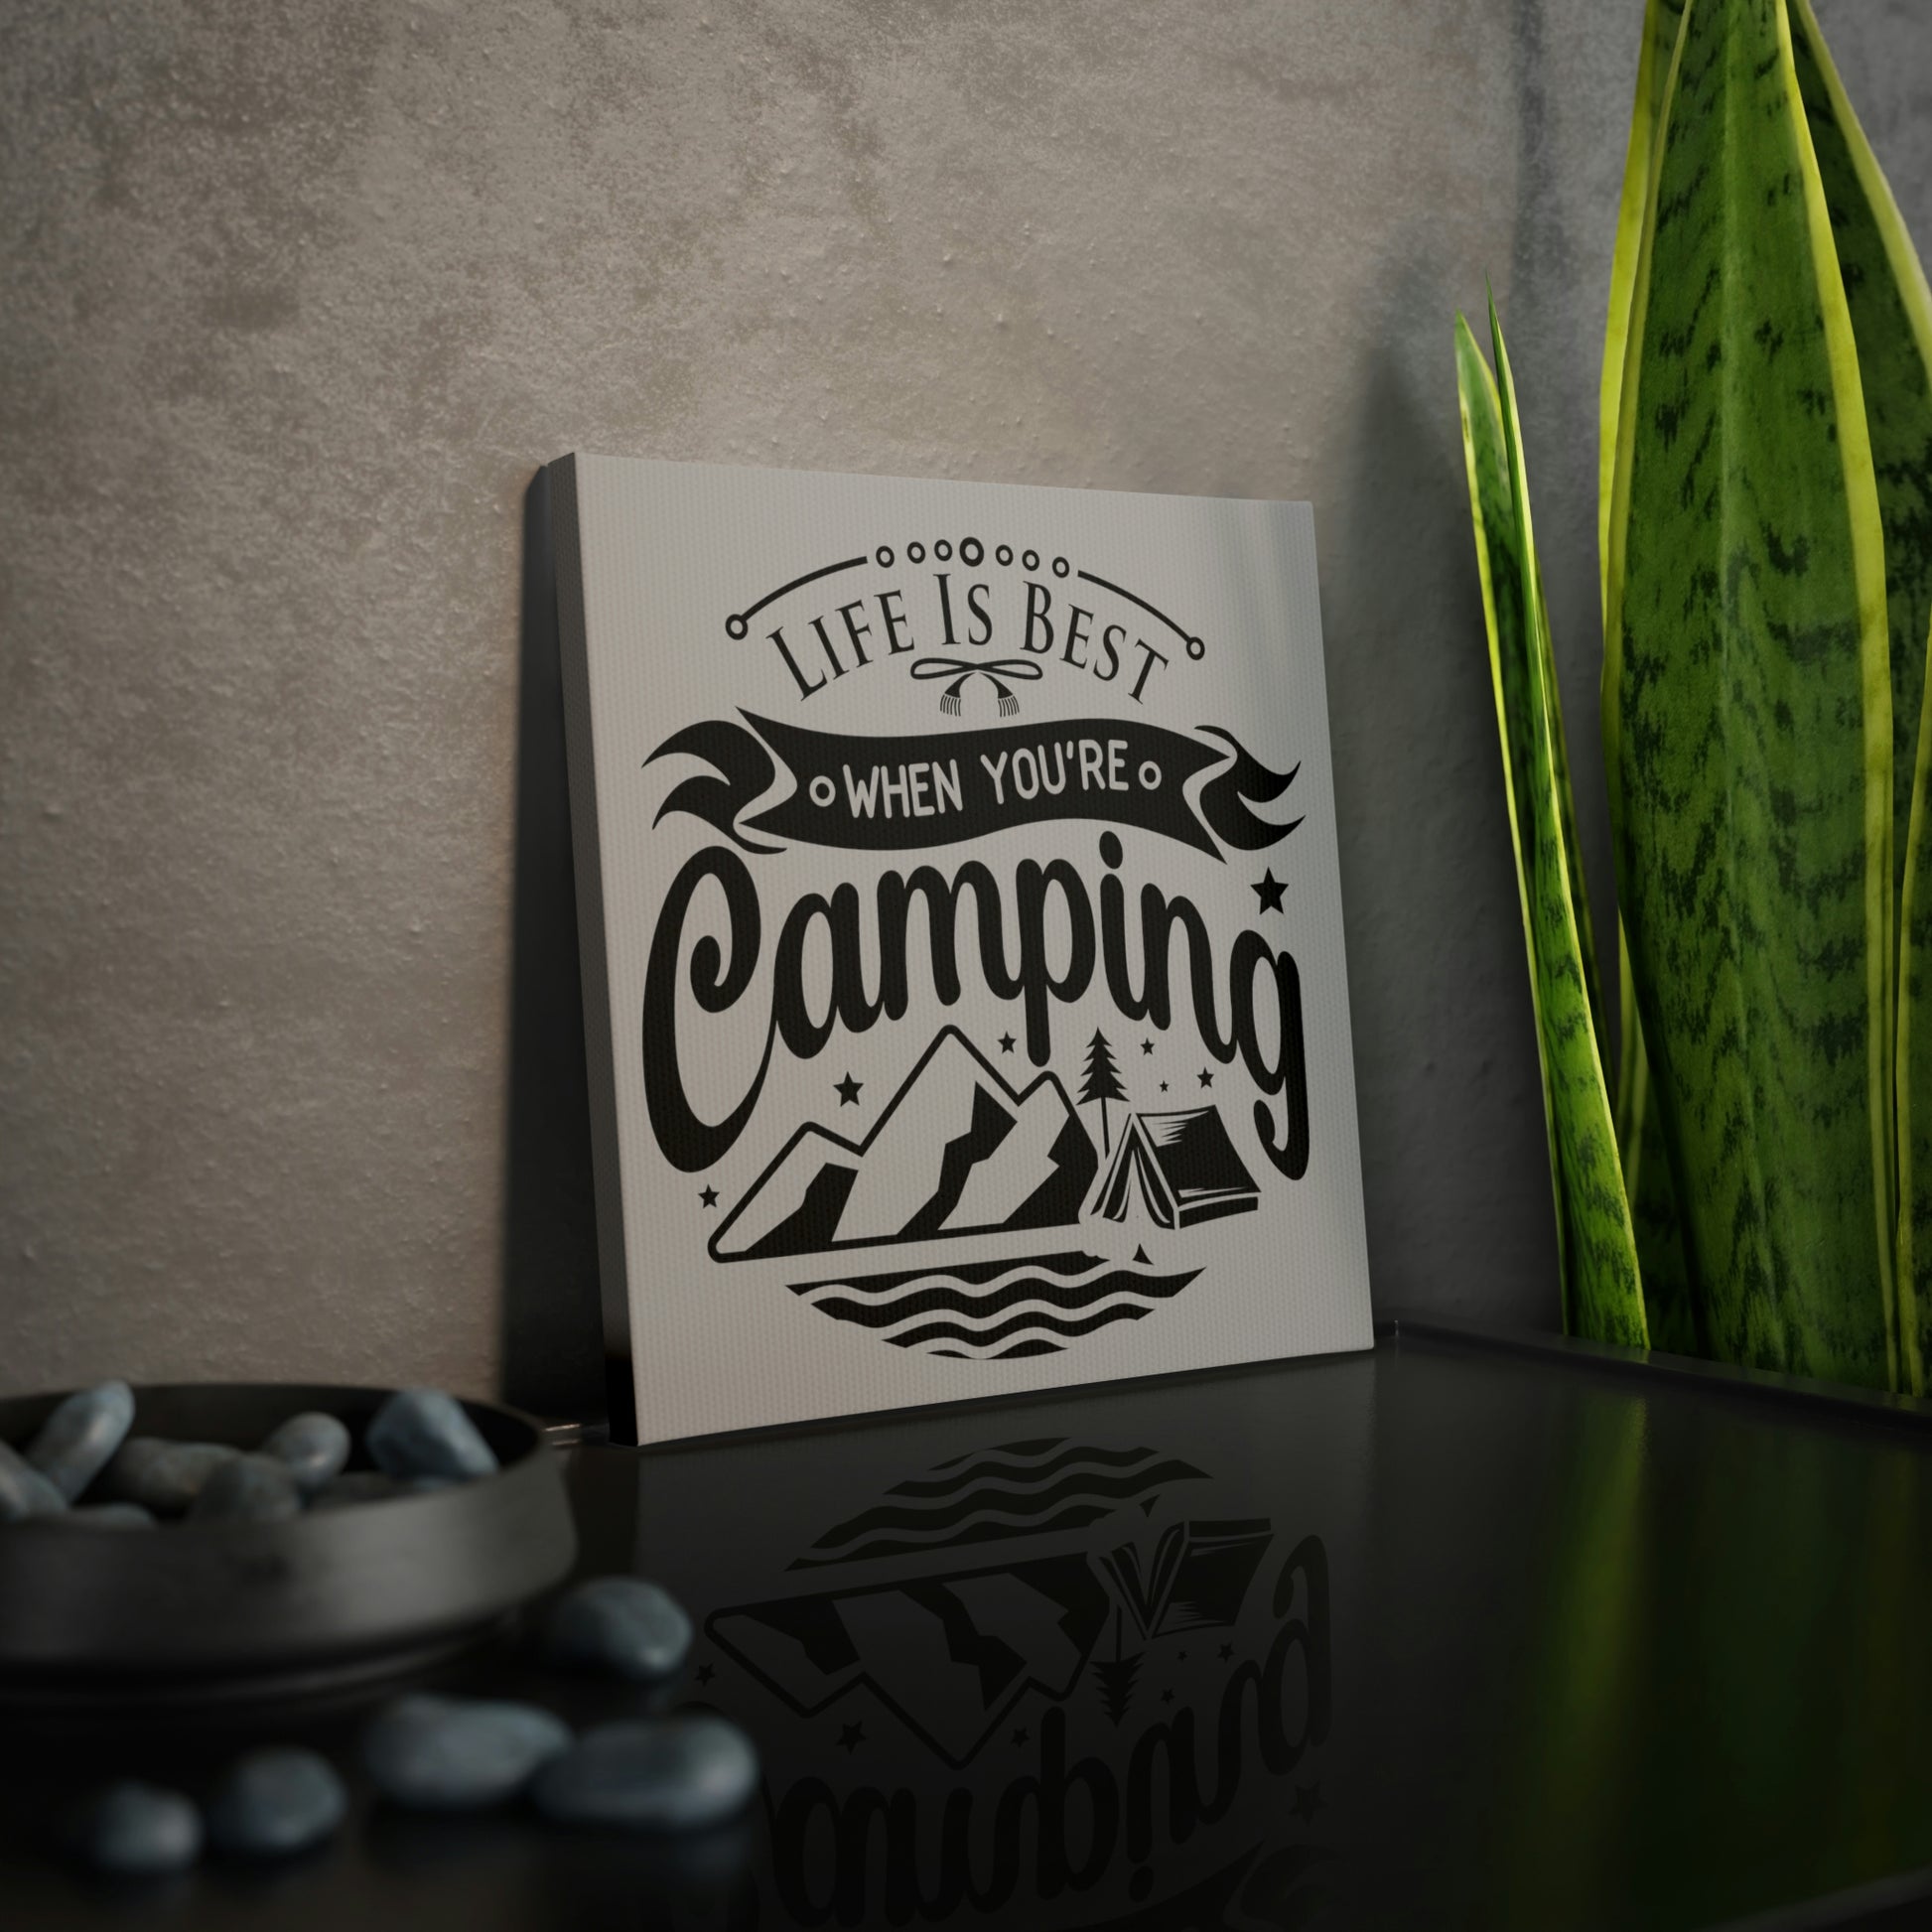 "Life Is Best When You're Camping" Canvas Photo Tile - Weave Got Gifts - Unique Gifts You Won’t Find Anywhere Else!